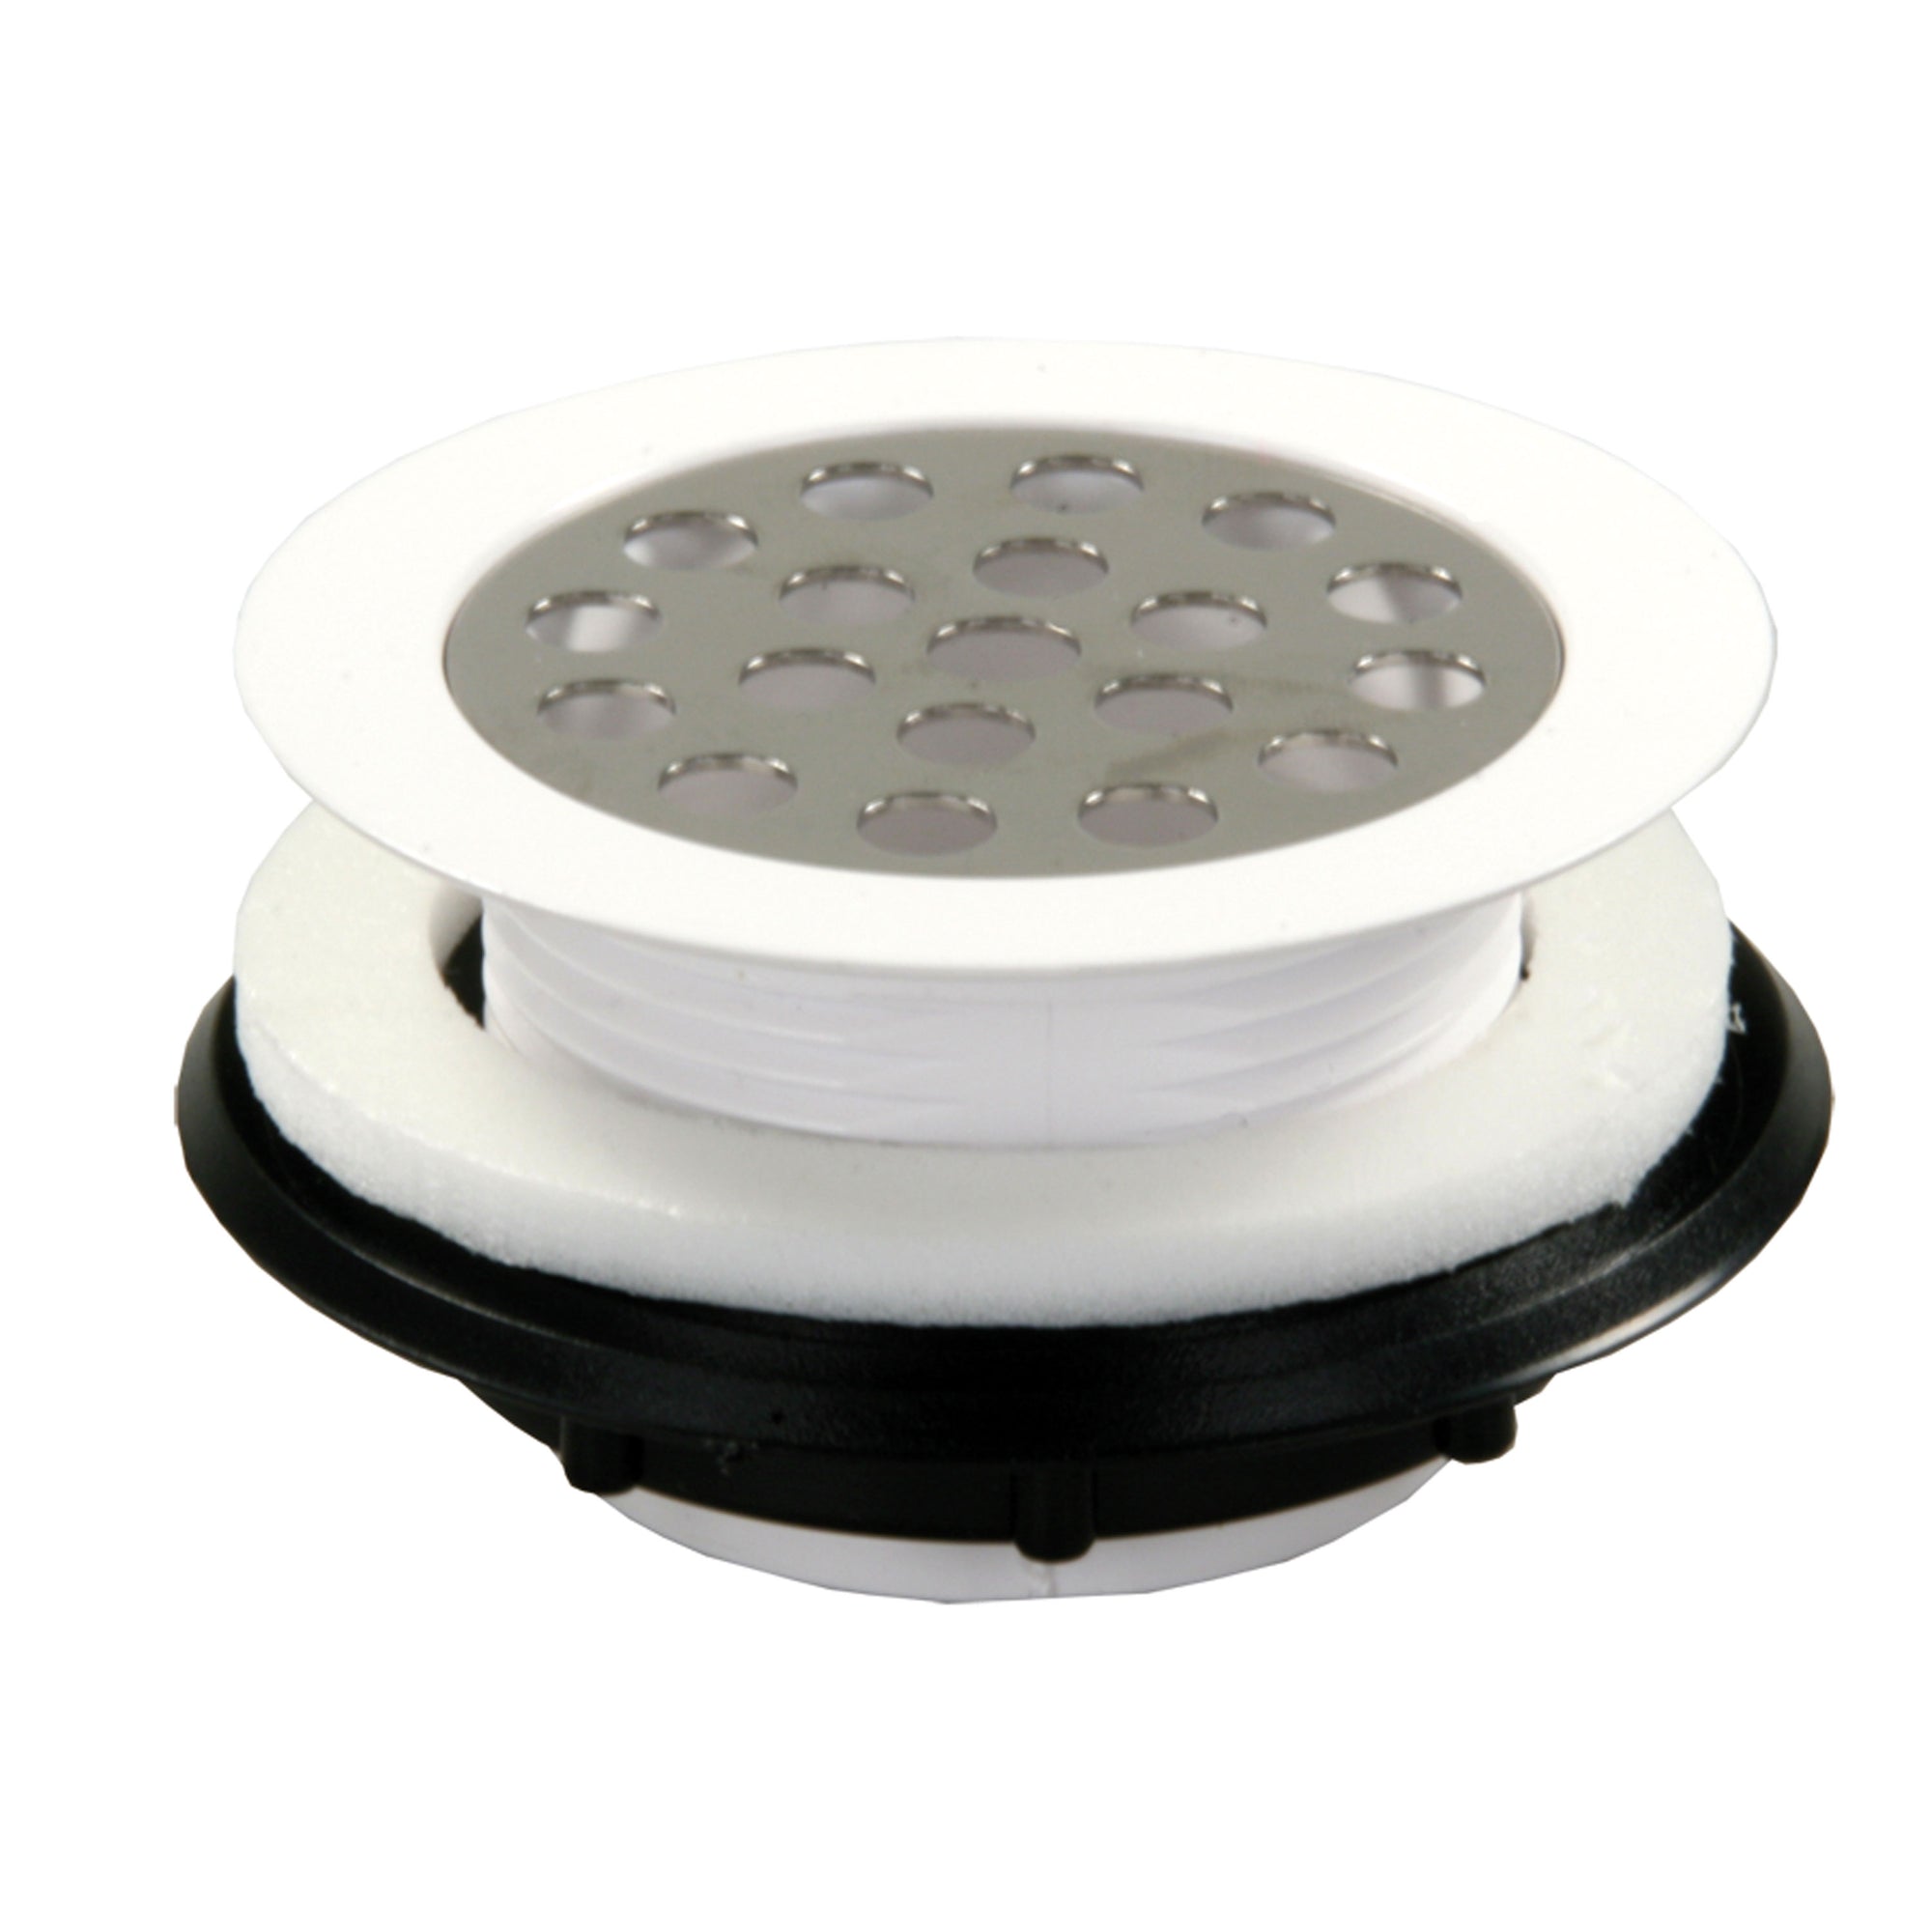 JR Products 95155 Shower Strainer with Grid - White